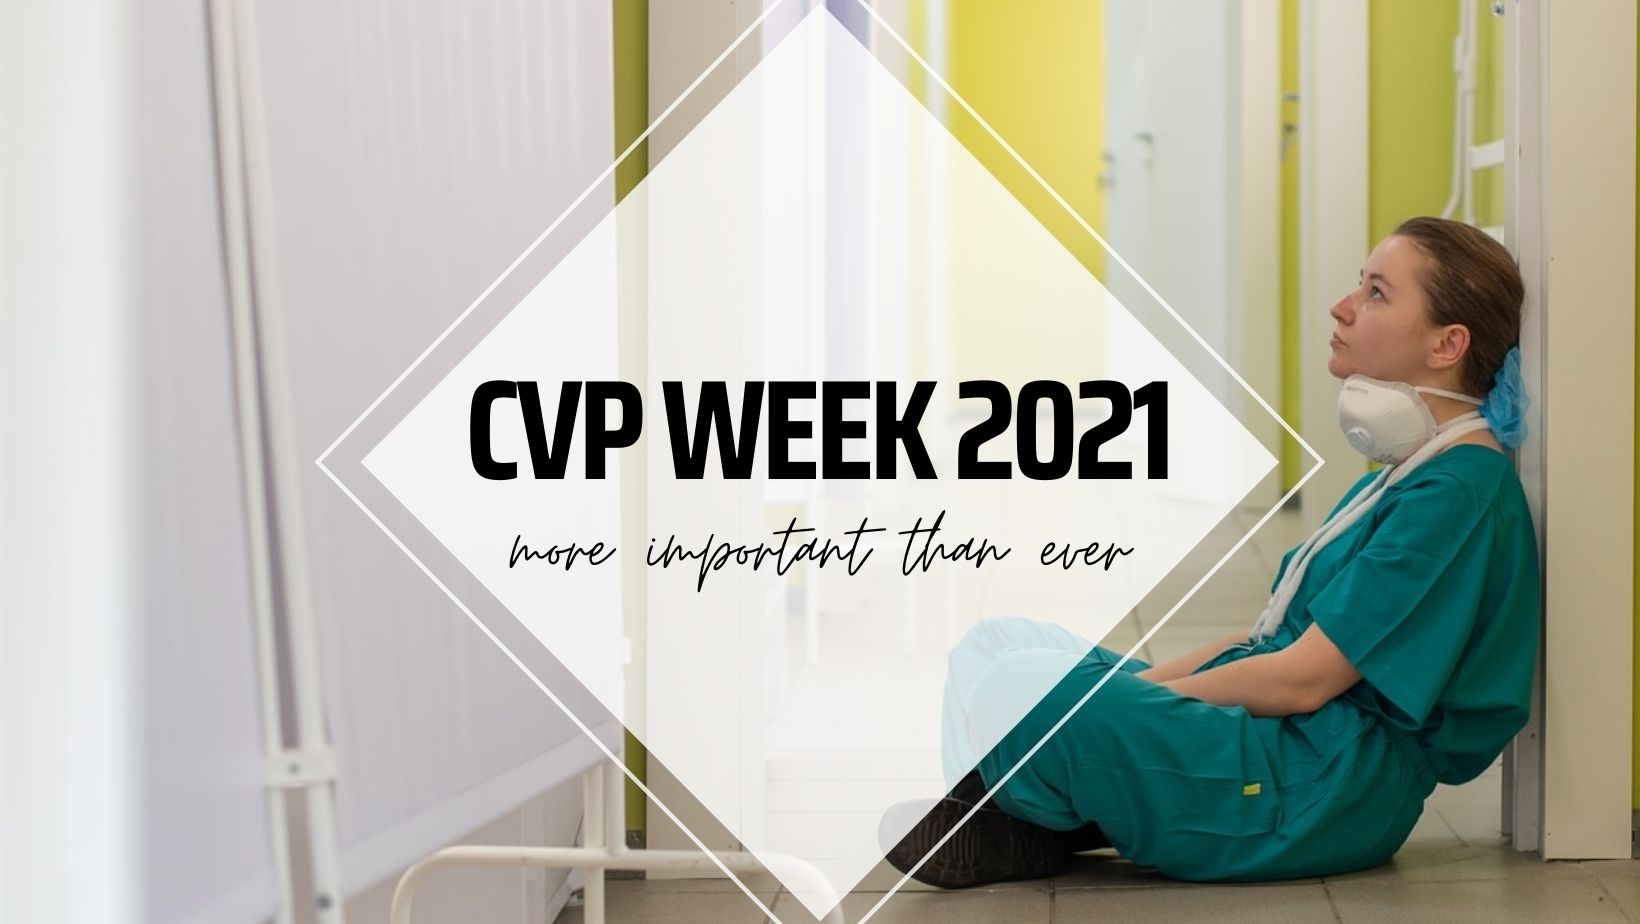 CVP Week 2021 - More important than ever.